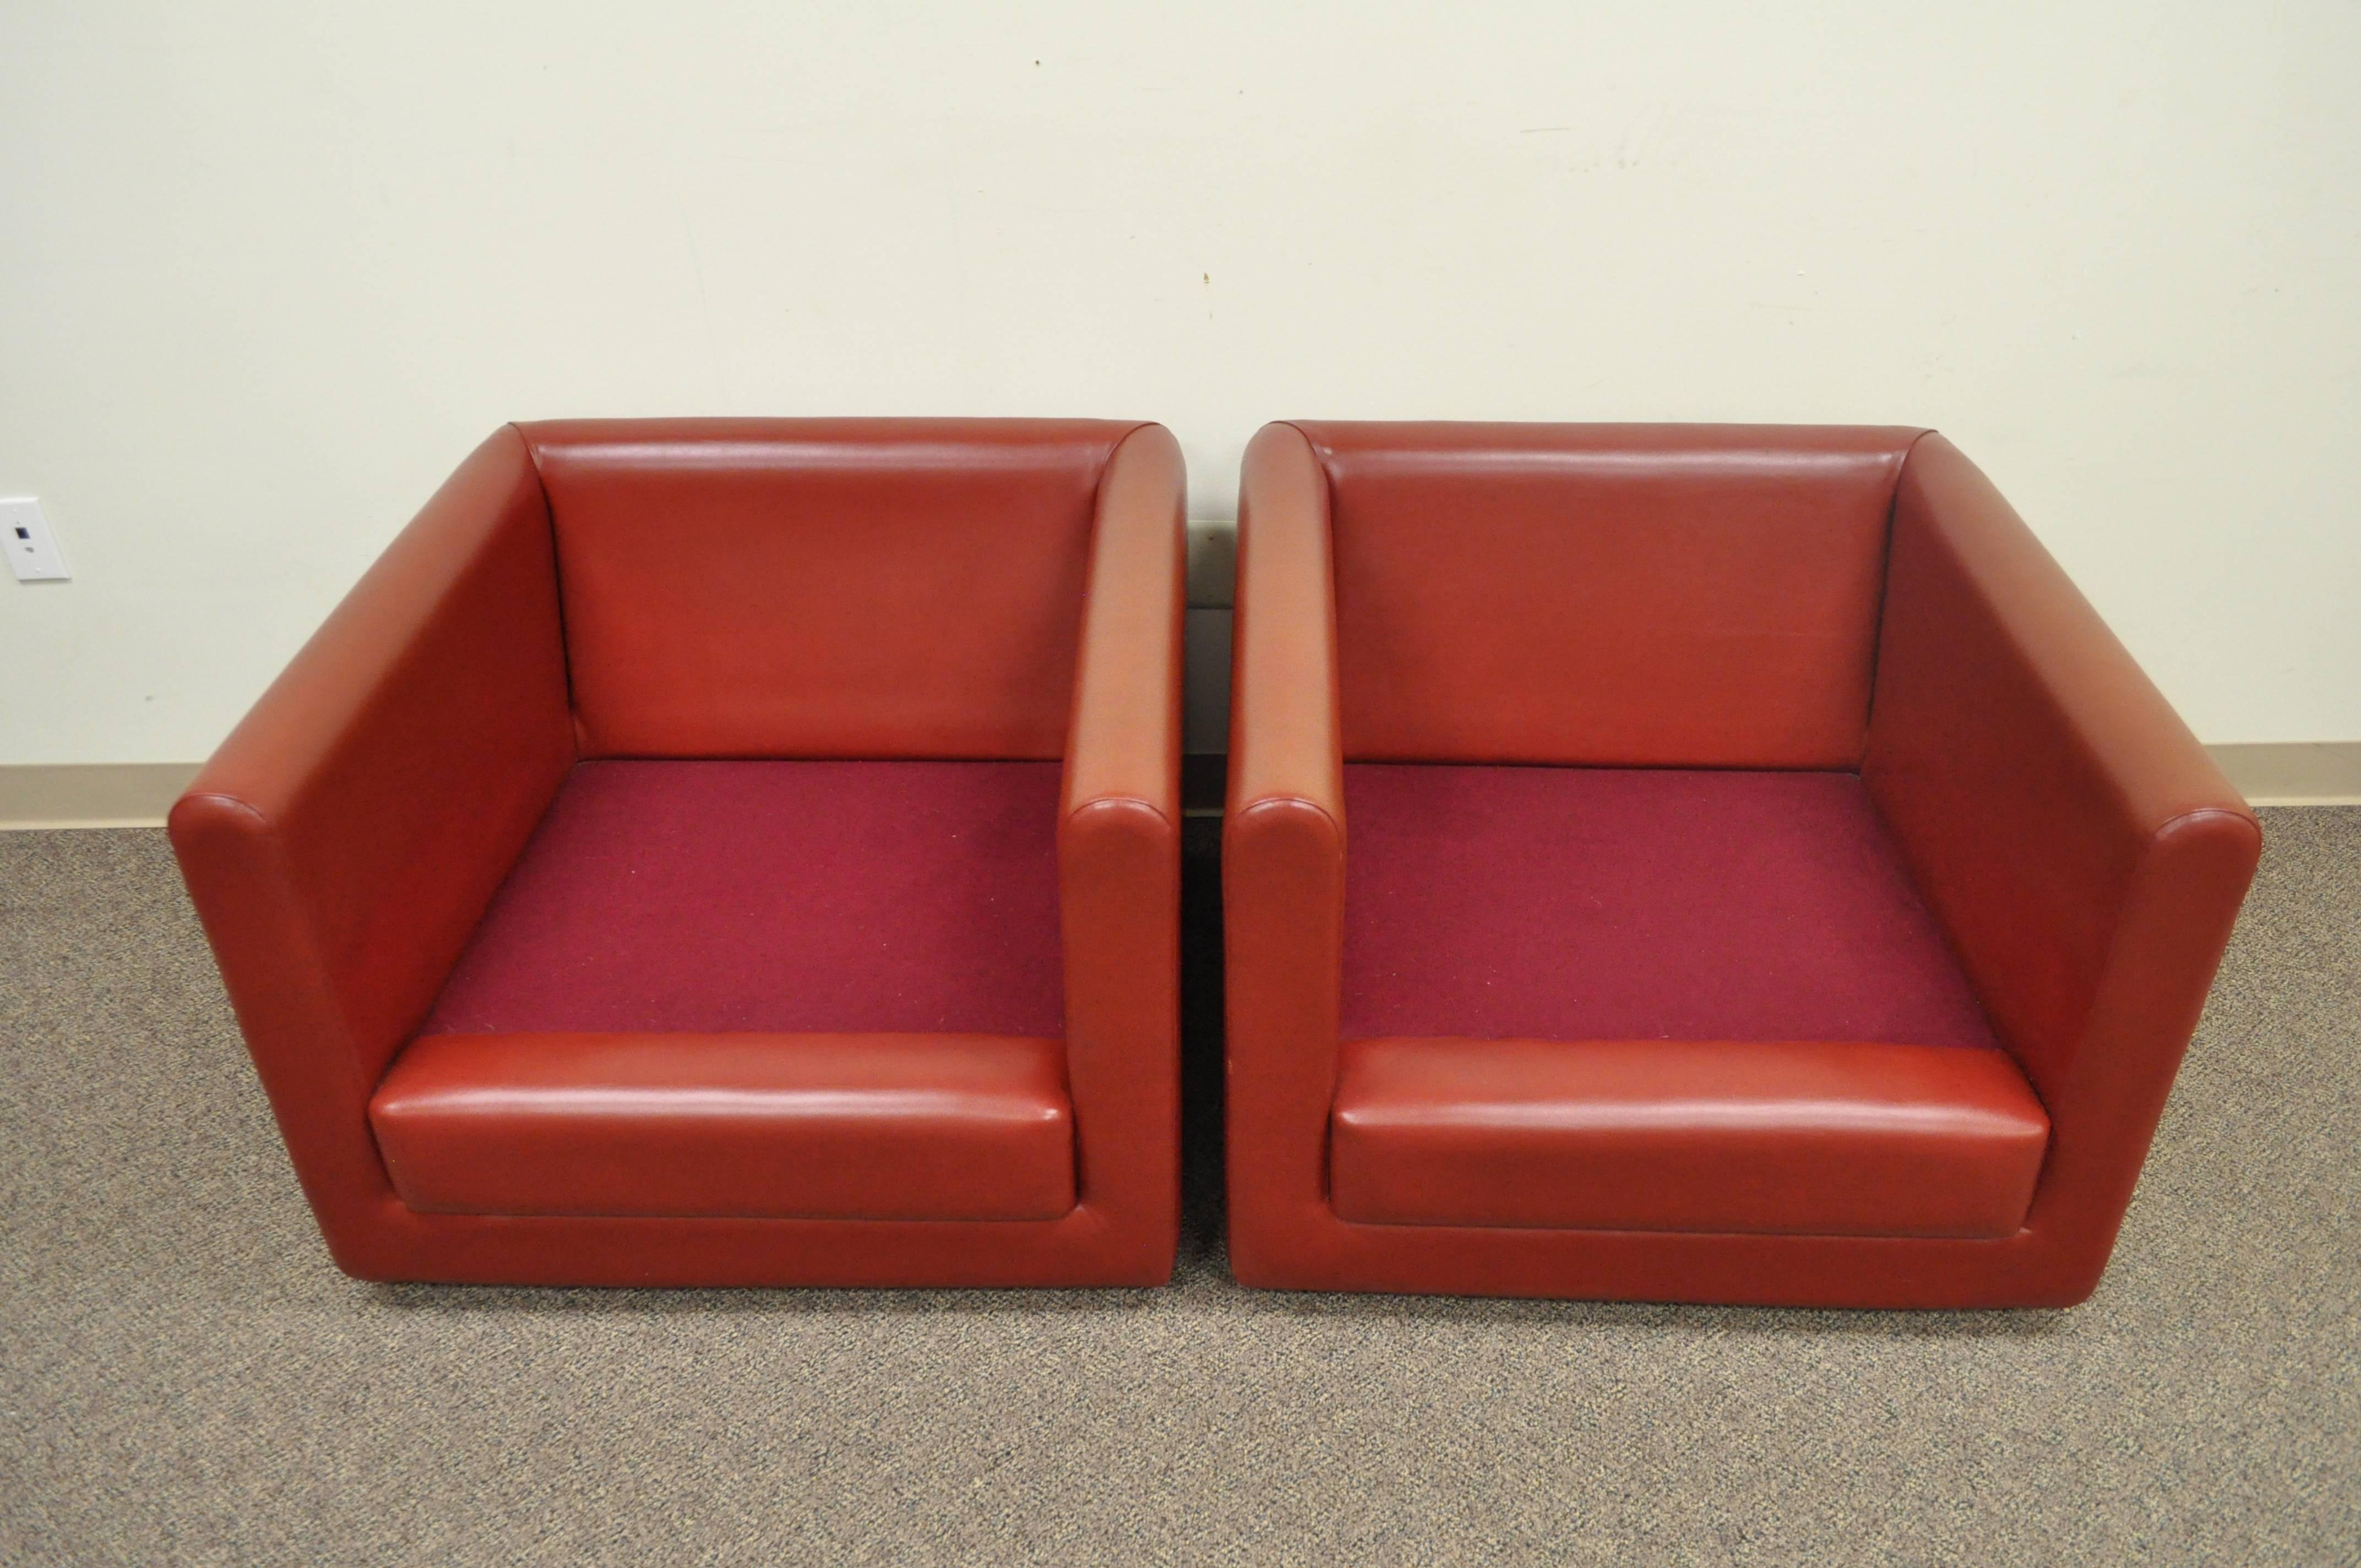 Pair of Red Leather Cube Club or Lounge Chairs on Casters 3